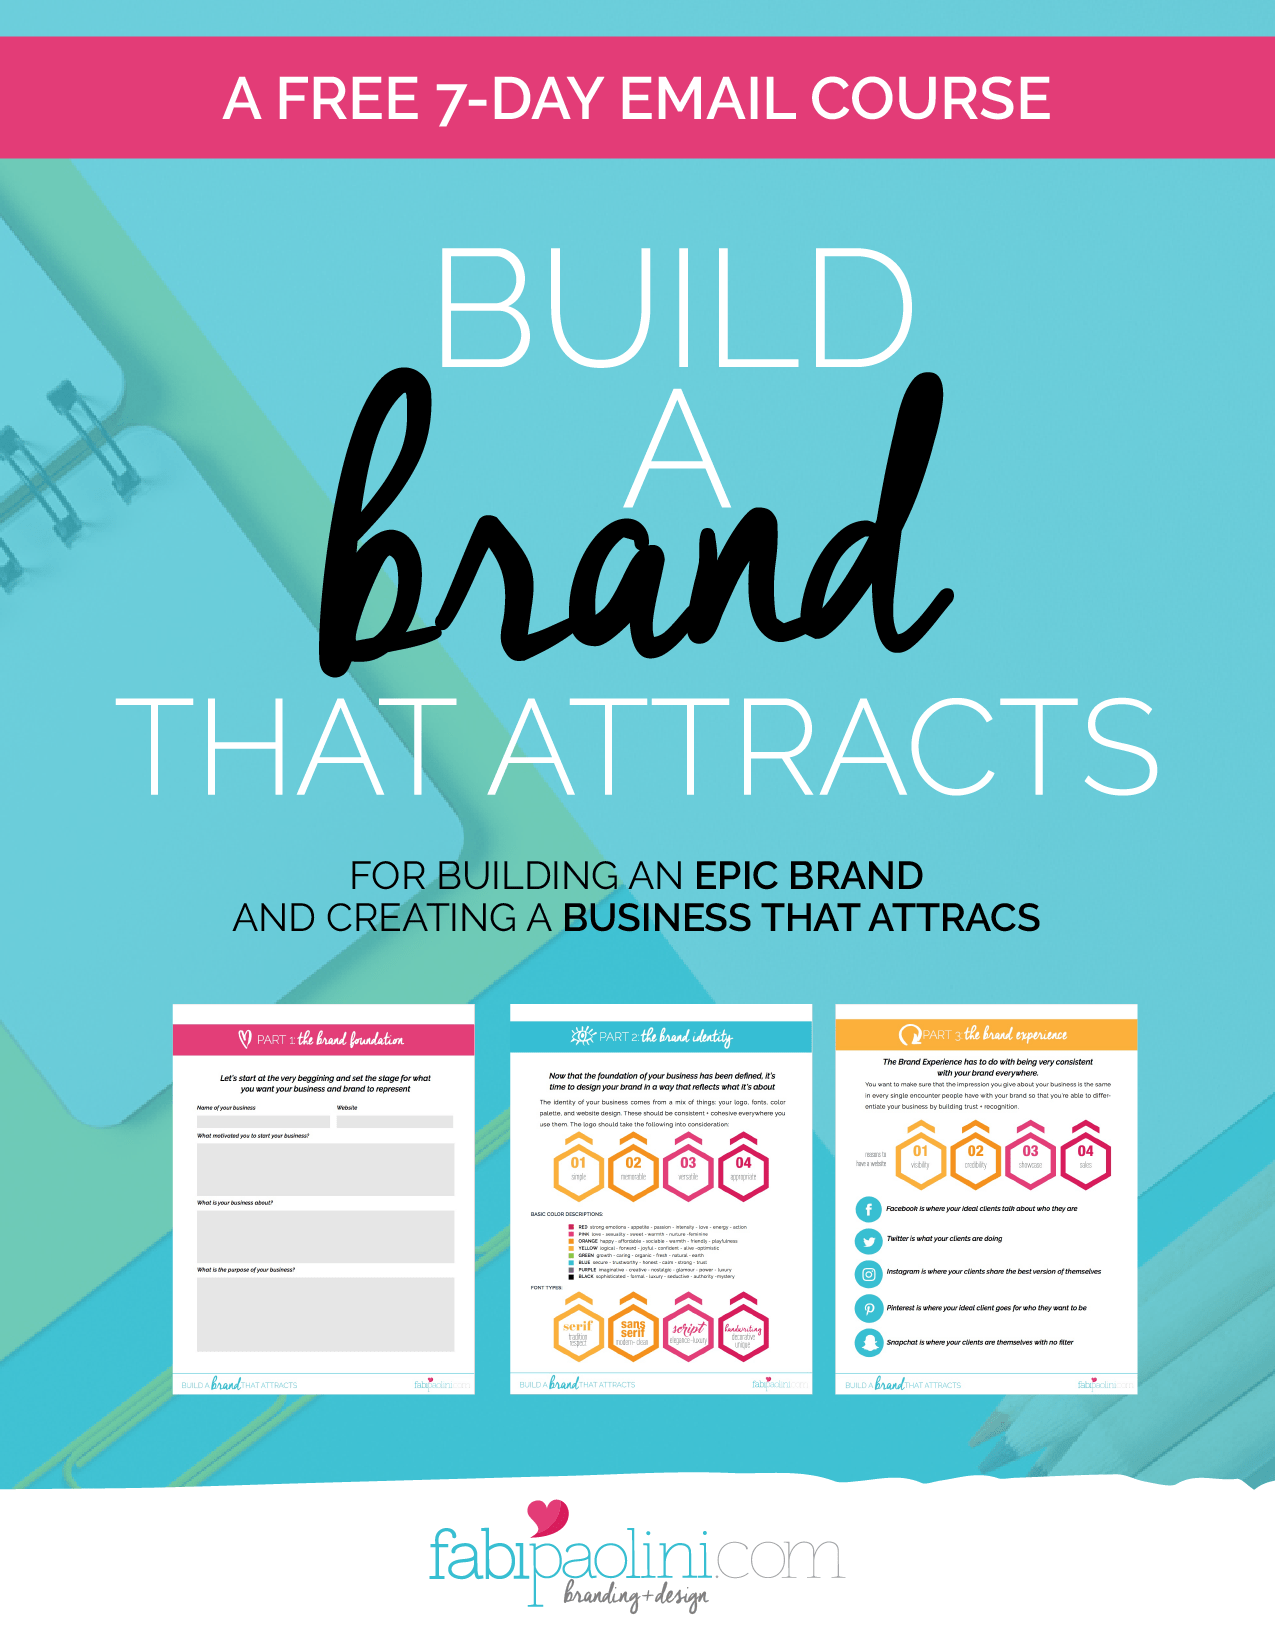 Build a Brand that Attracts - A free email branding course | Fabi Paolini Branding + Design + entrepreneur